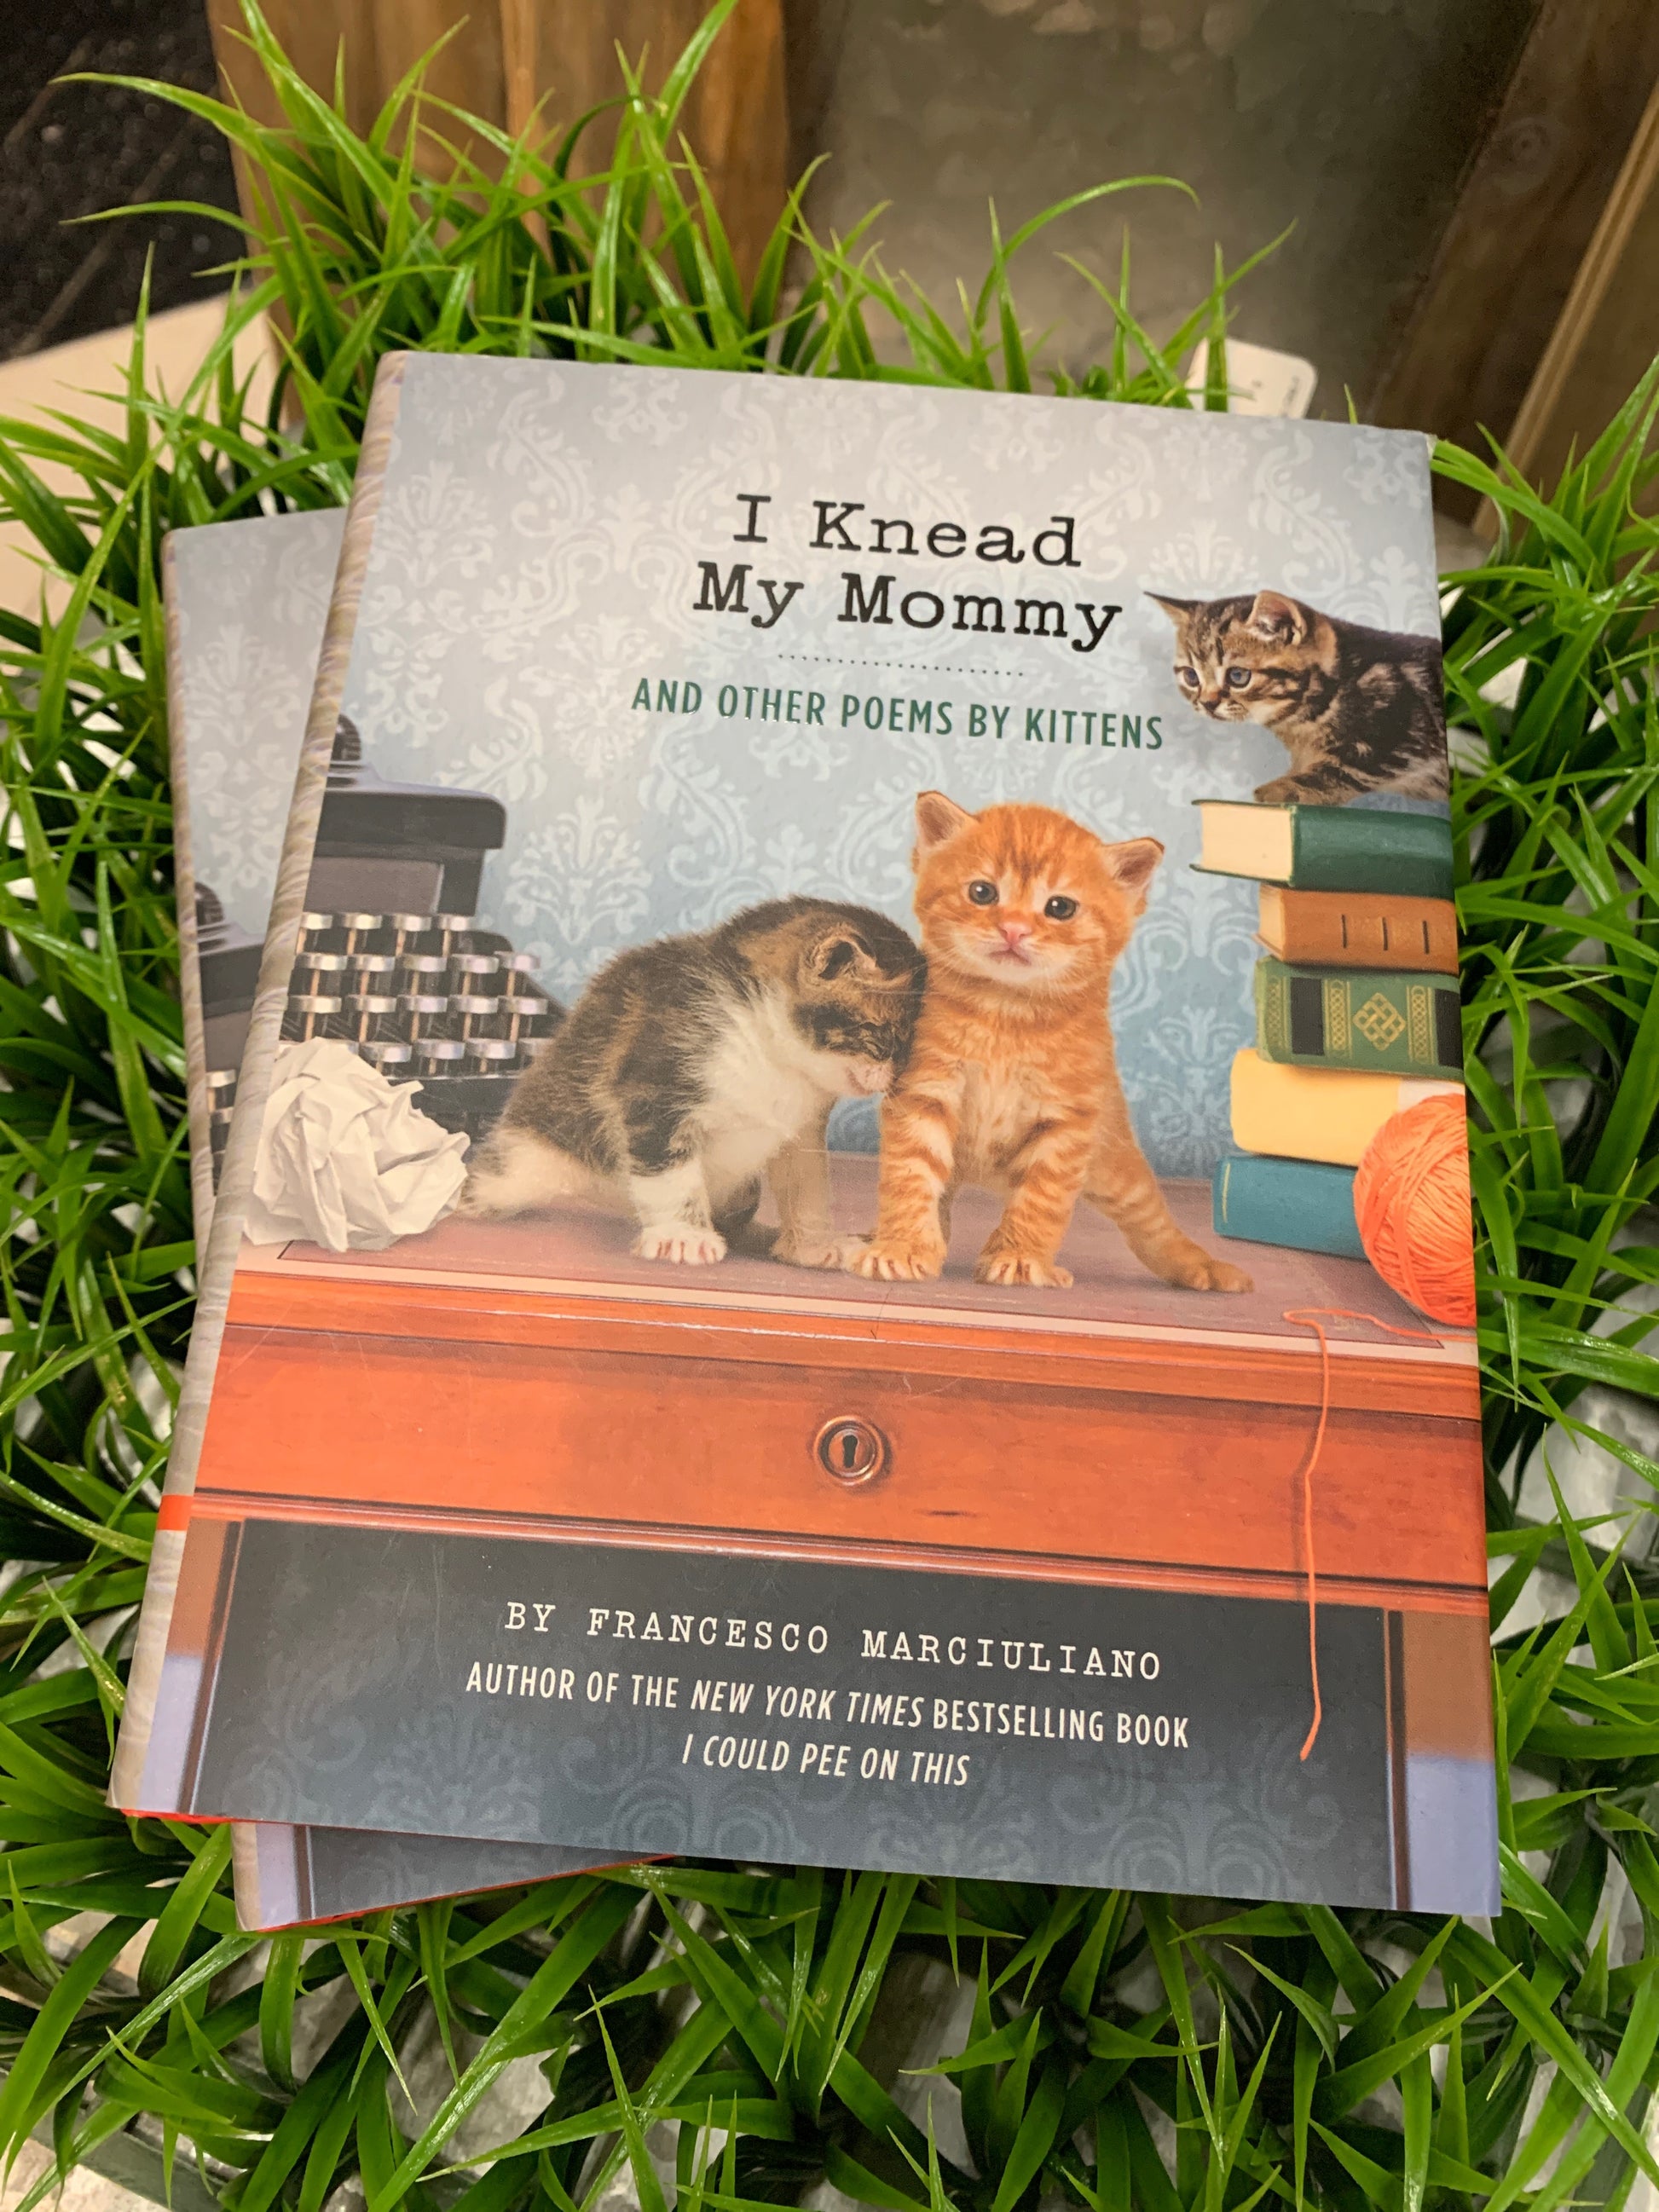 I Knead My Mommy is a book of confessional poems about the triumphs, trials, and daily discoveries of being a kitten. From climbing walls to claiming hearts, these little cats bare all in such instant classics as "And Then You Said 'No,'" "Ode to a Lizard I Didn't Know Is Also a Pet in This House," and "I Will Save You." With adorable photos of the poetic prodigies throughout, this volume gives readers a glimpse into their confused and curious feline minds as they encounter the world around them.